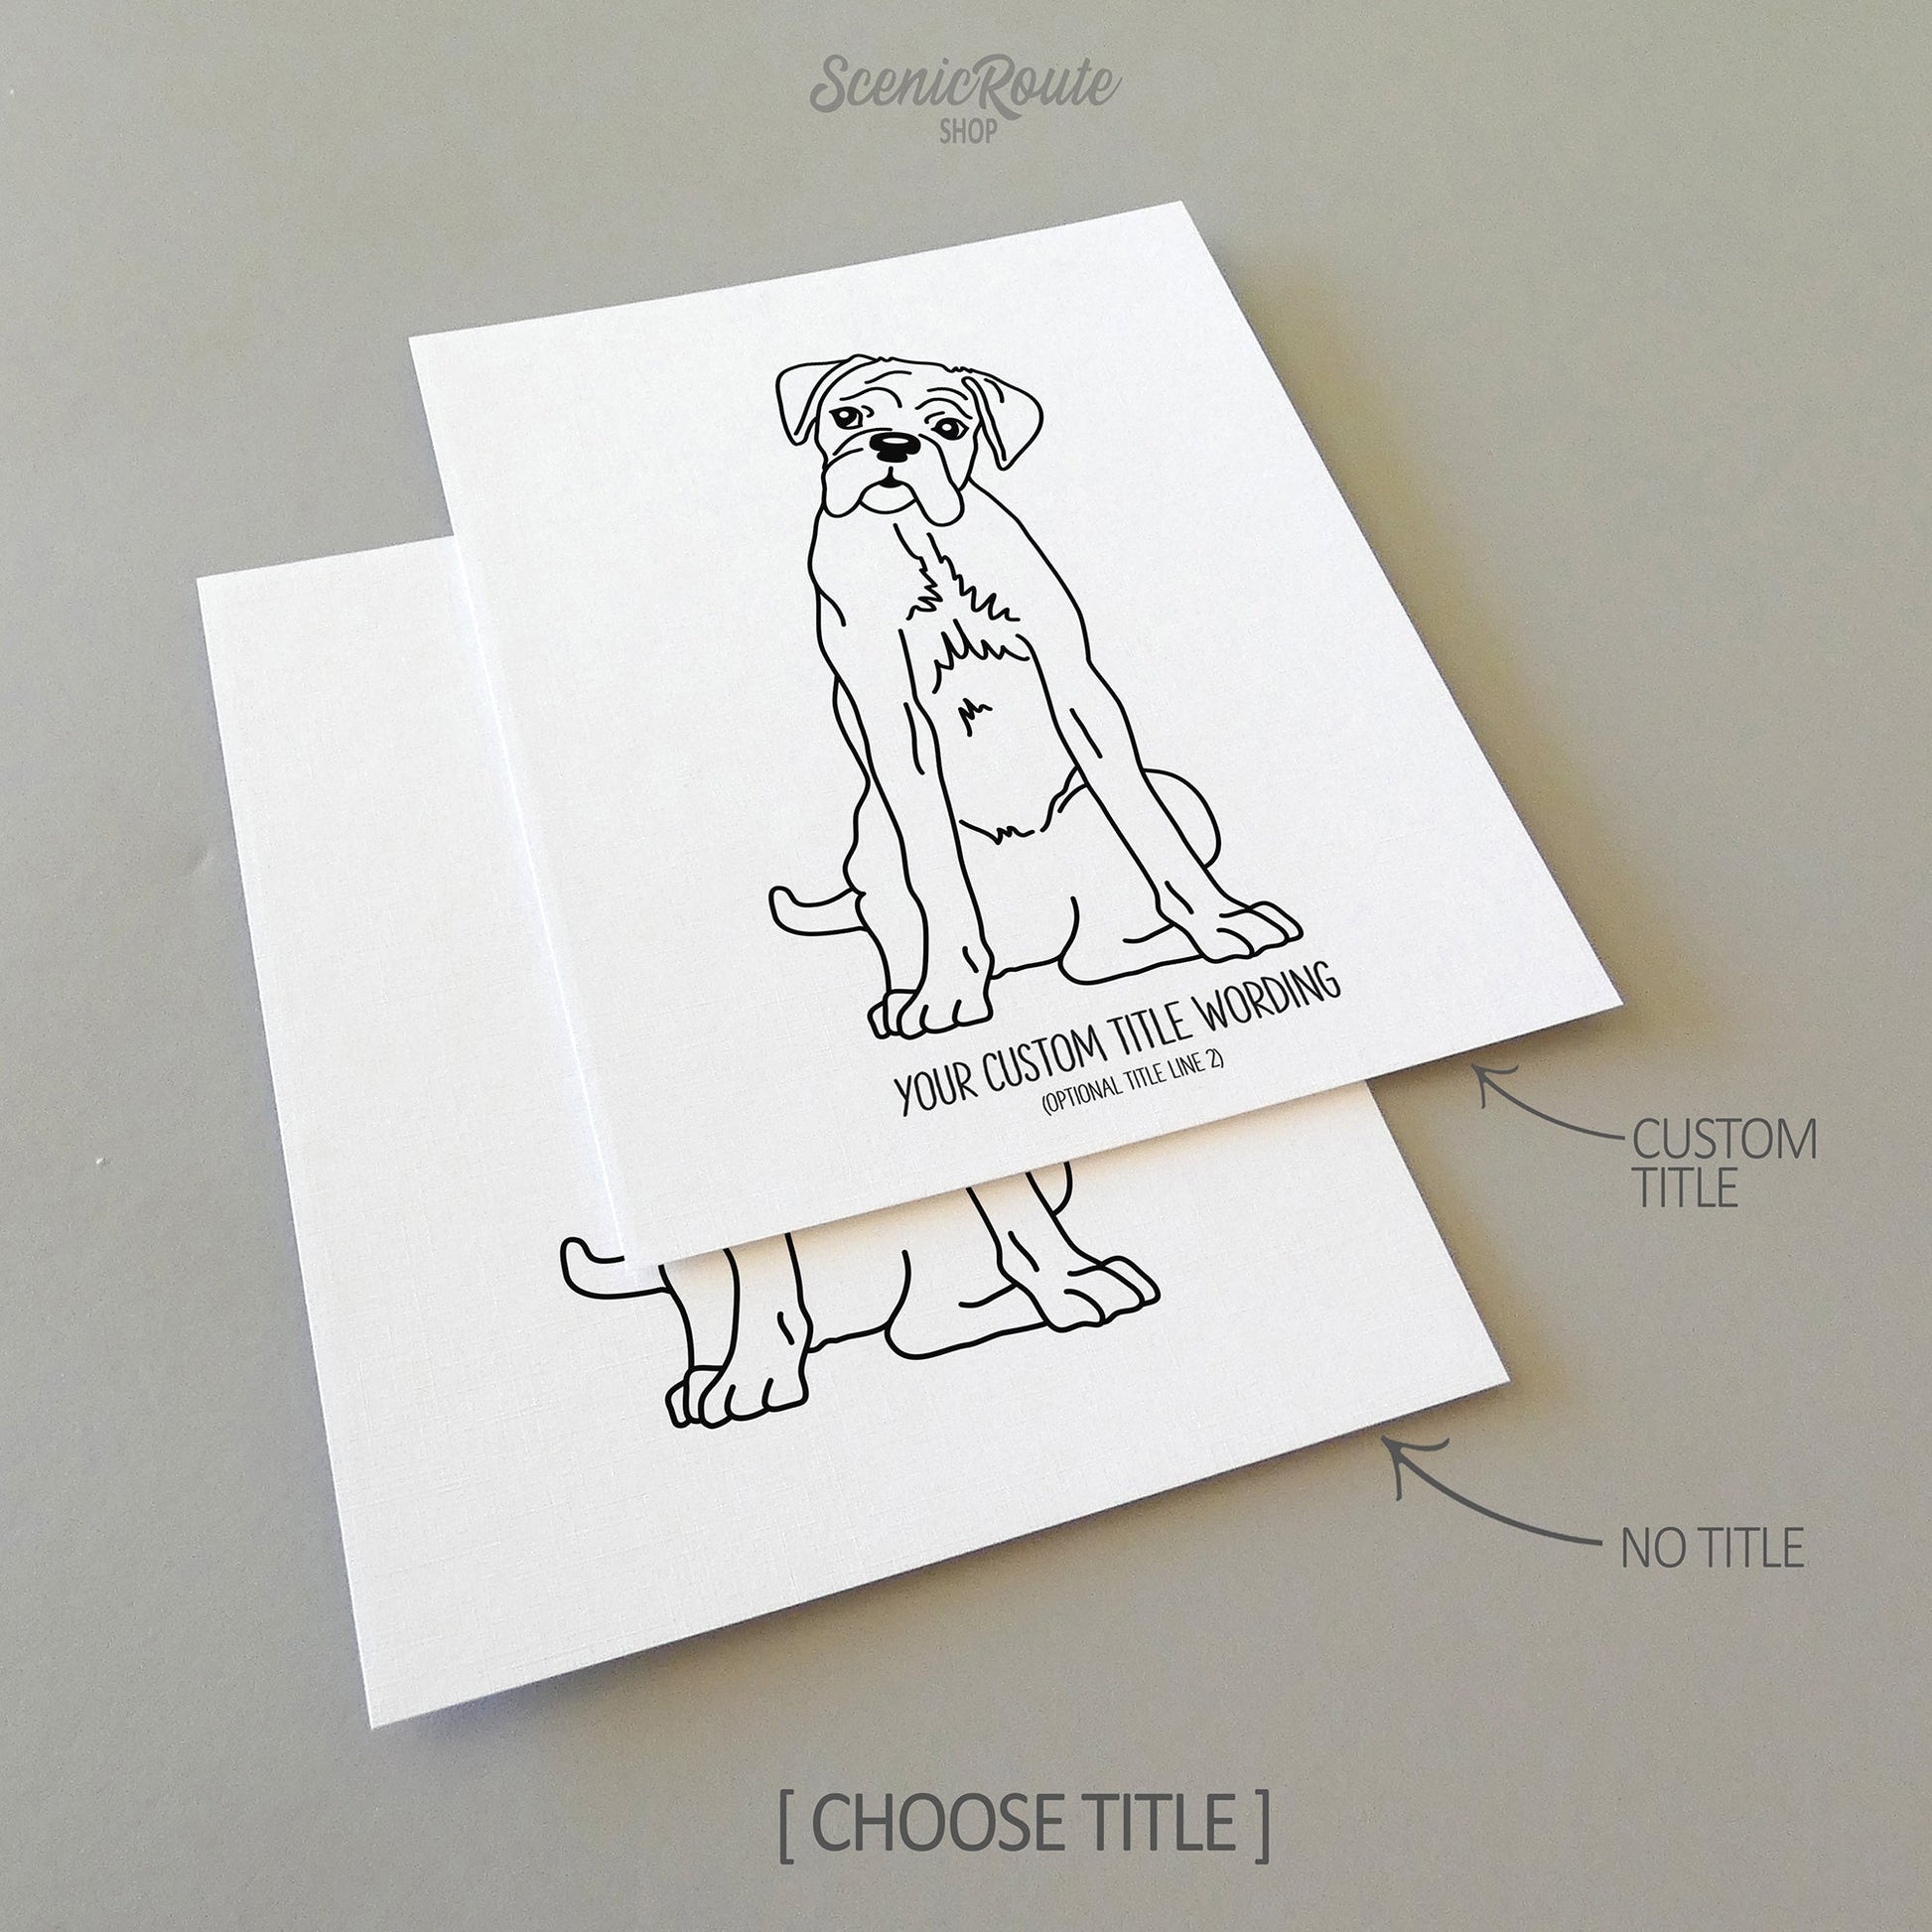 Two drawings of a Boxer dog on white linen paper with a gray background.  Pieces are shown with “No Title” and “Custom Title” options to illustrate the available art print options.